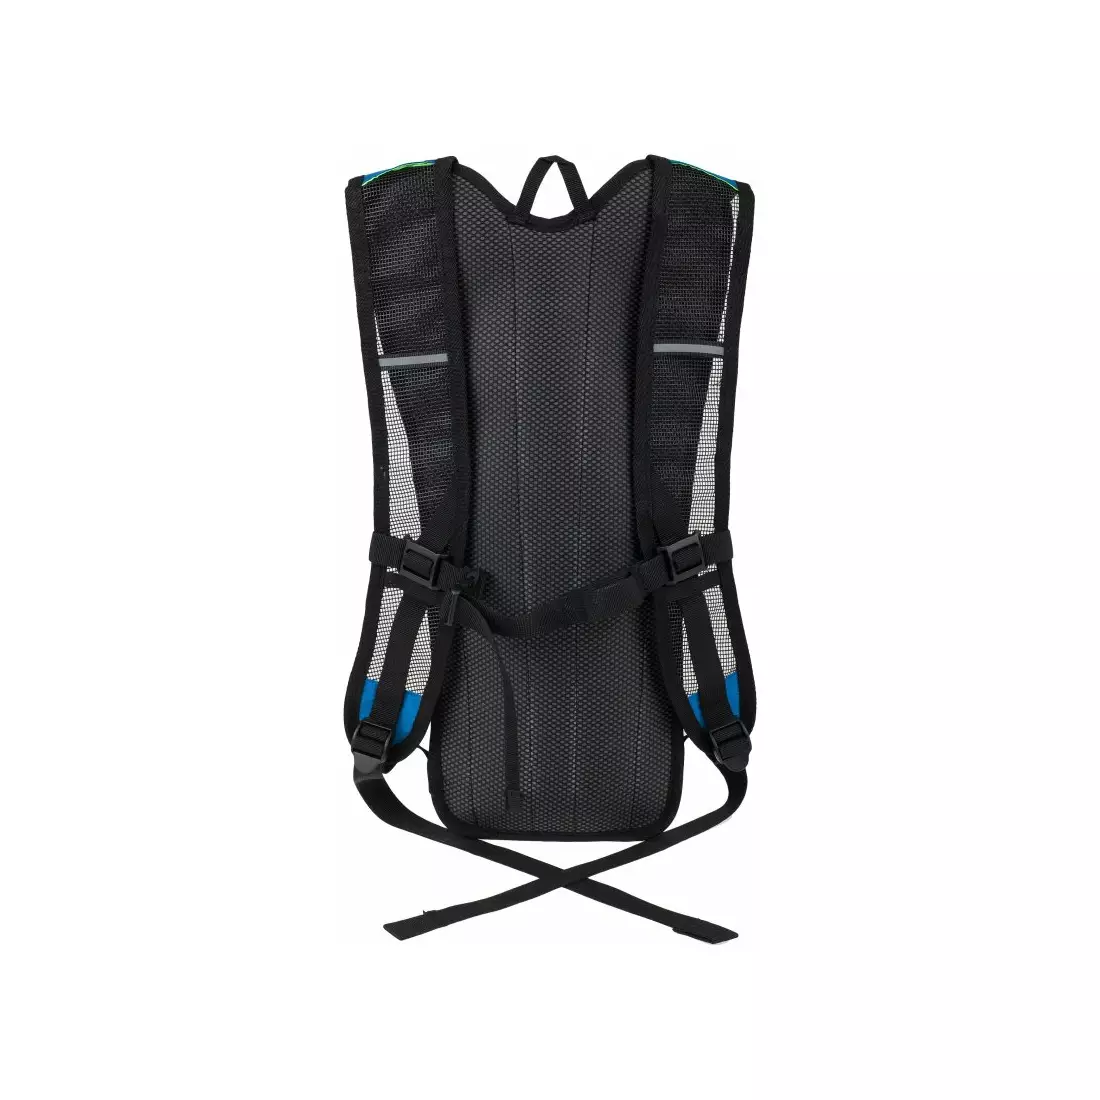 4F PCR001 bicycle backpack, blue